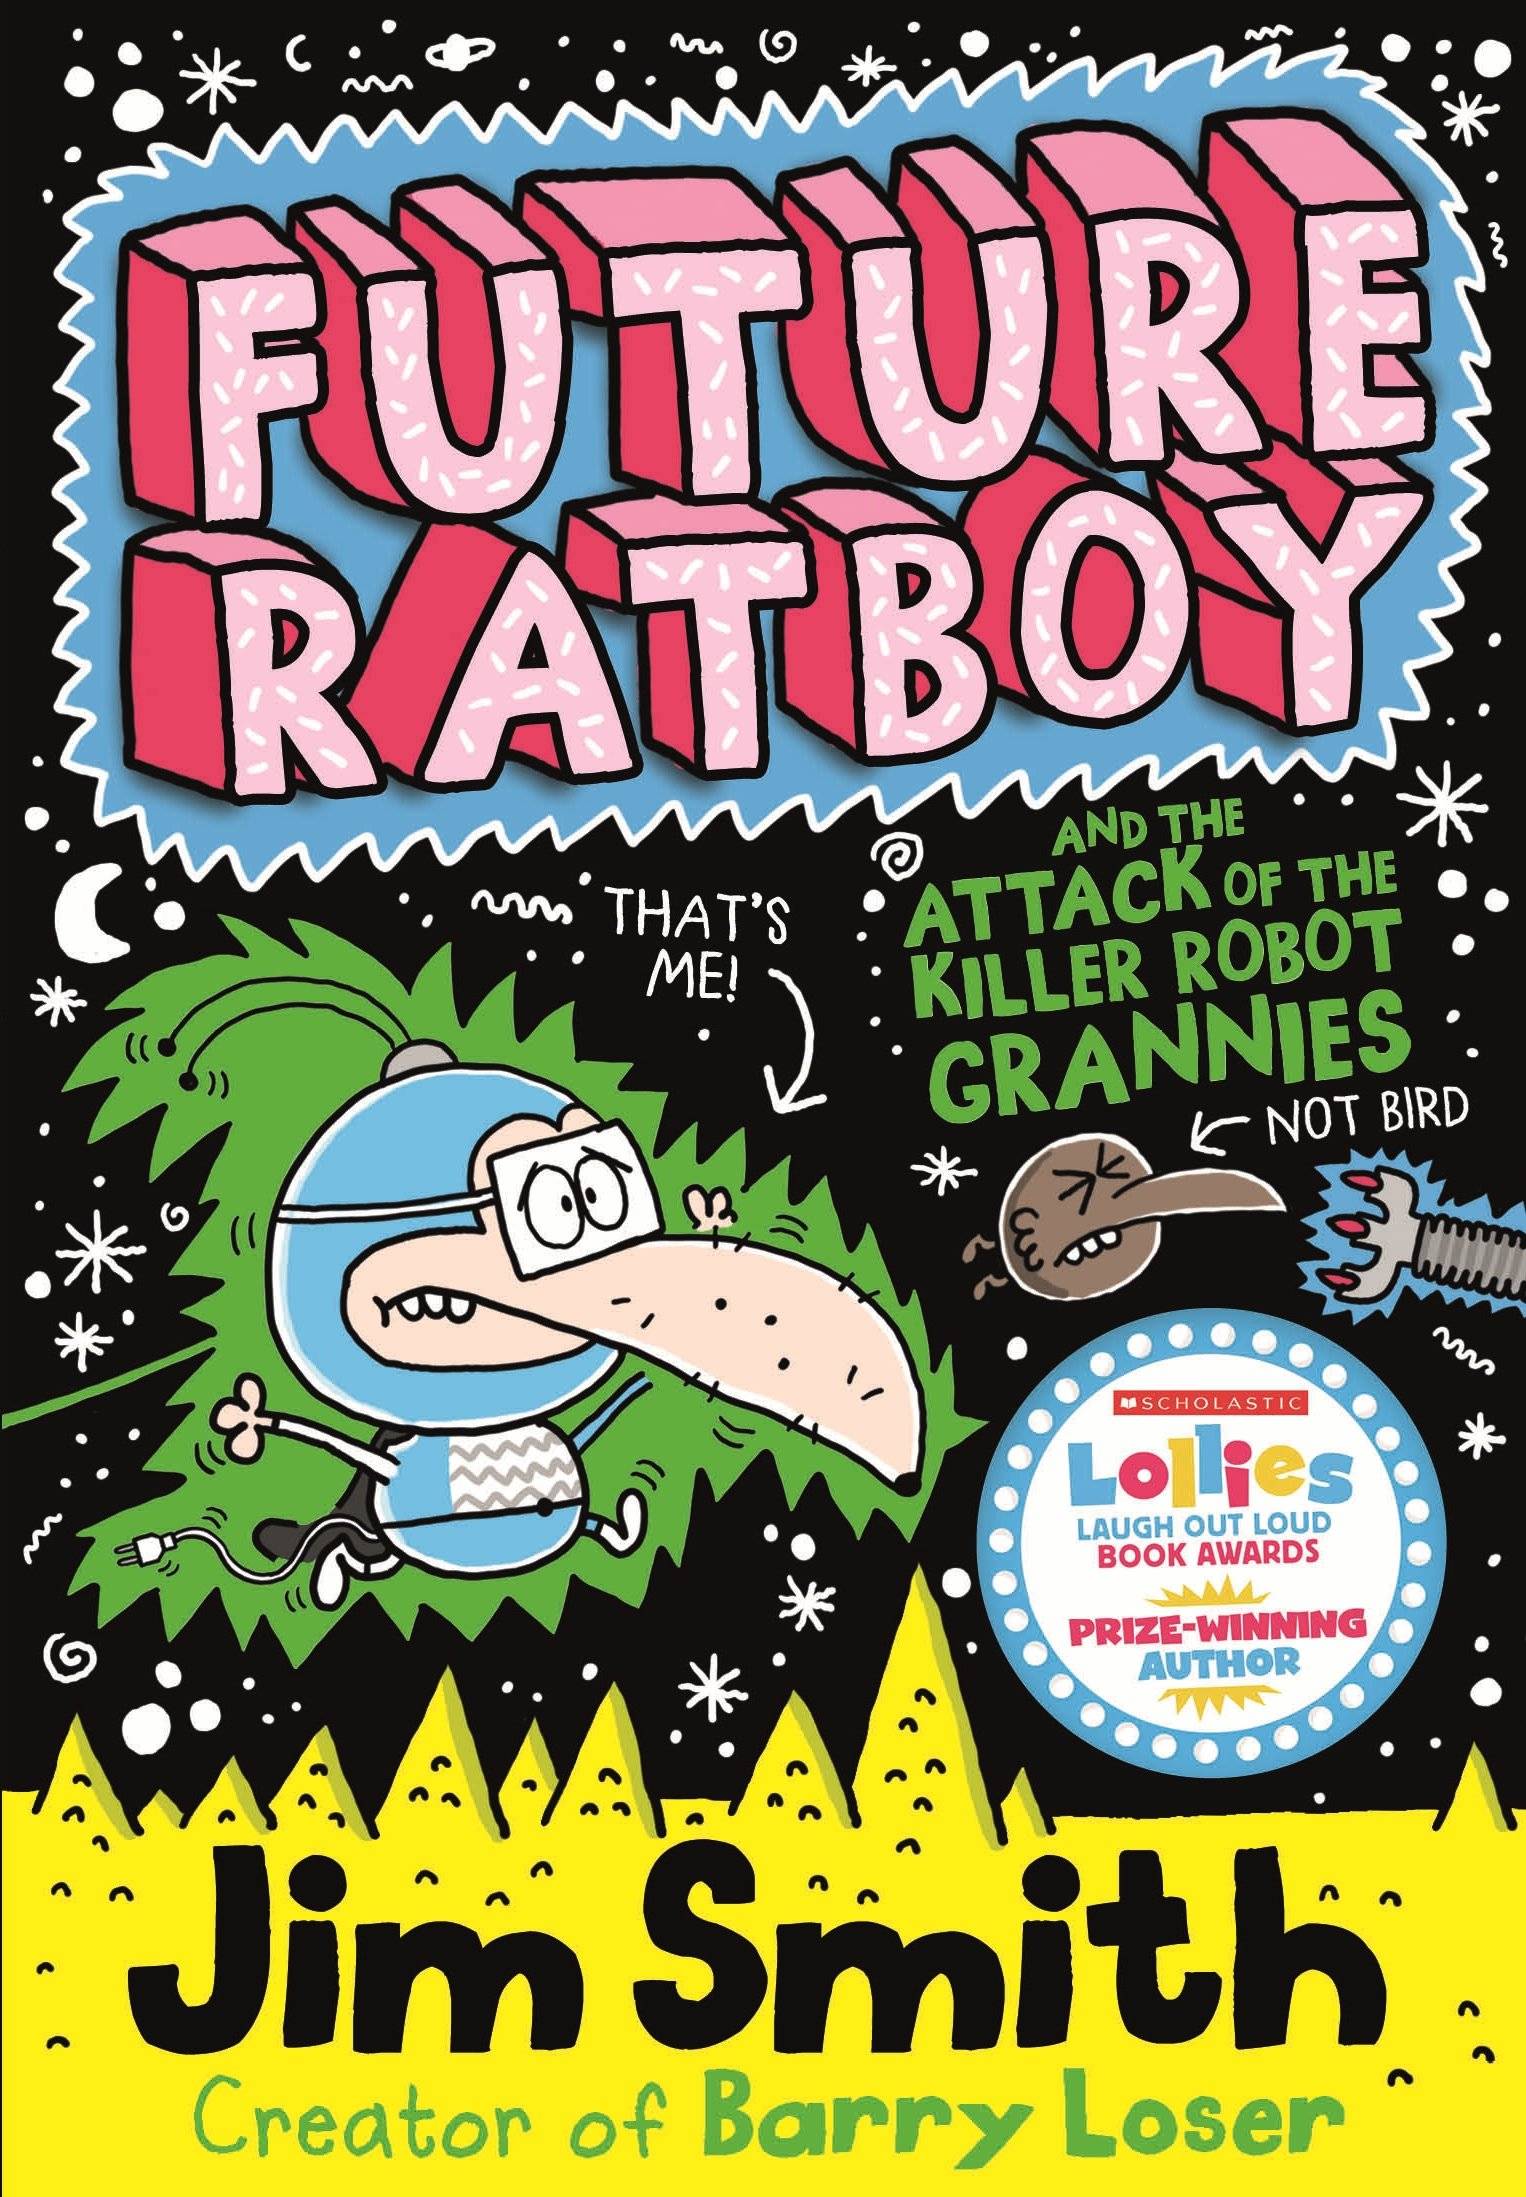 IMG : Future Rat boy and the attack of the killer robot Grannies